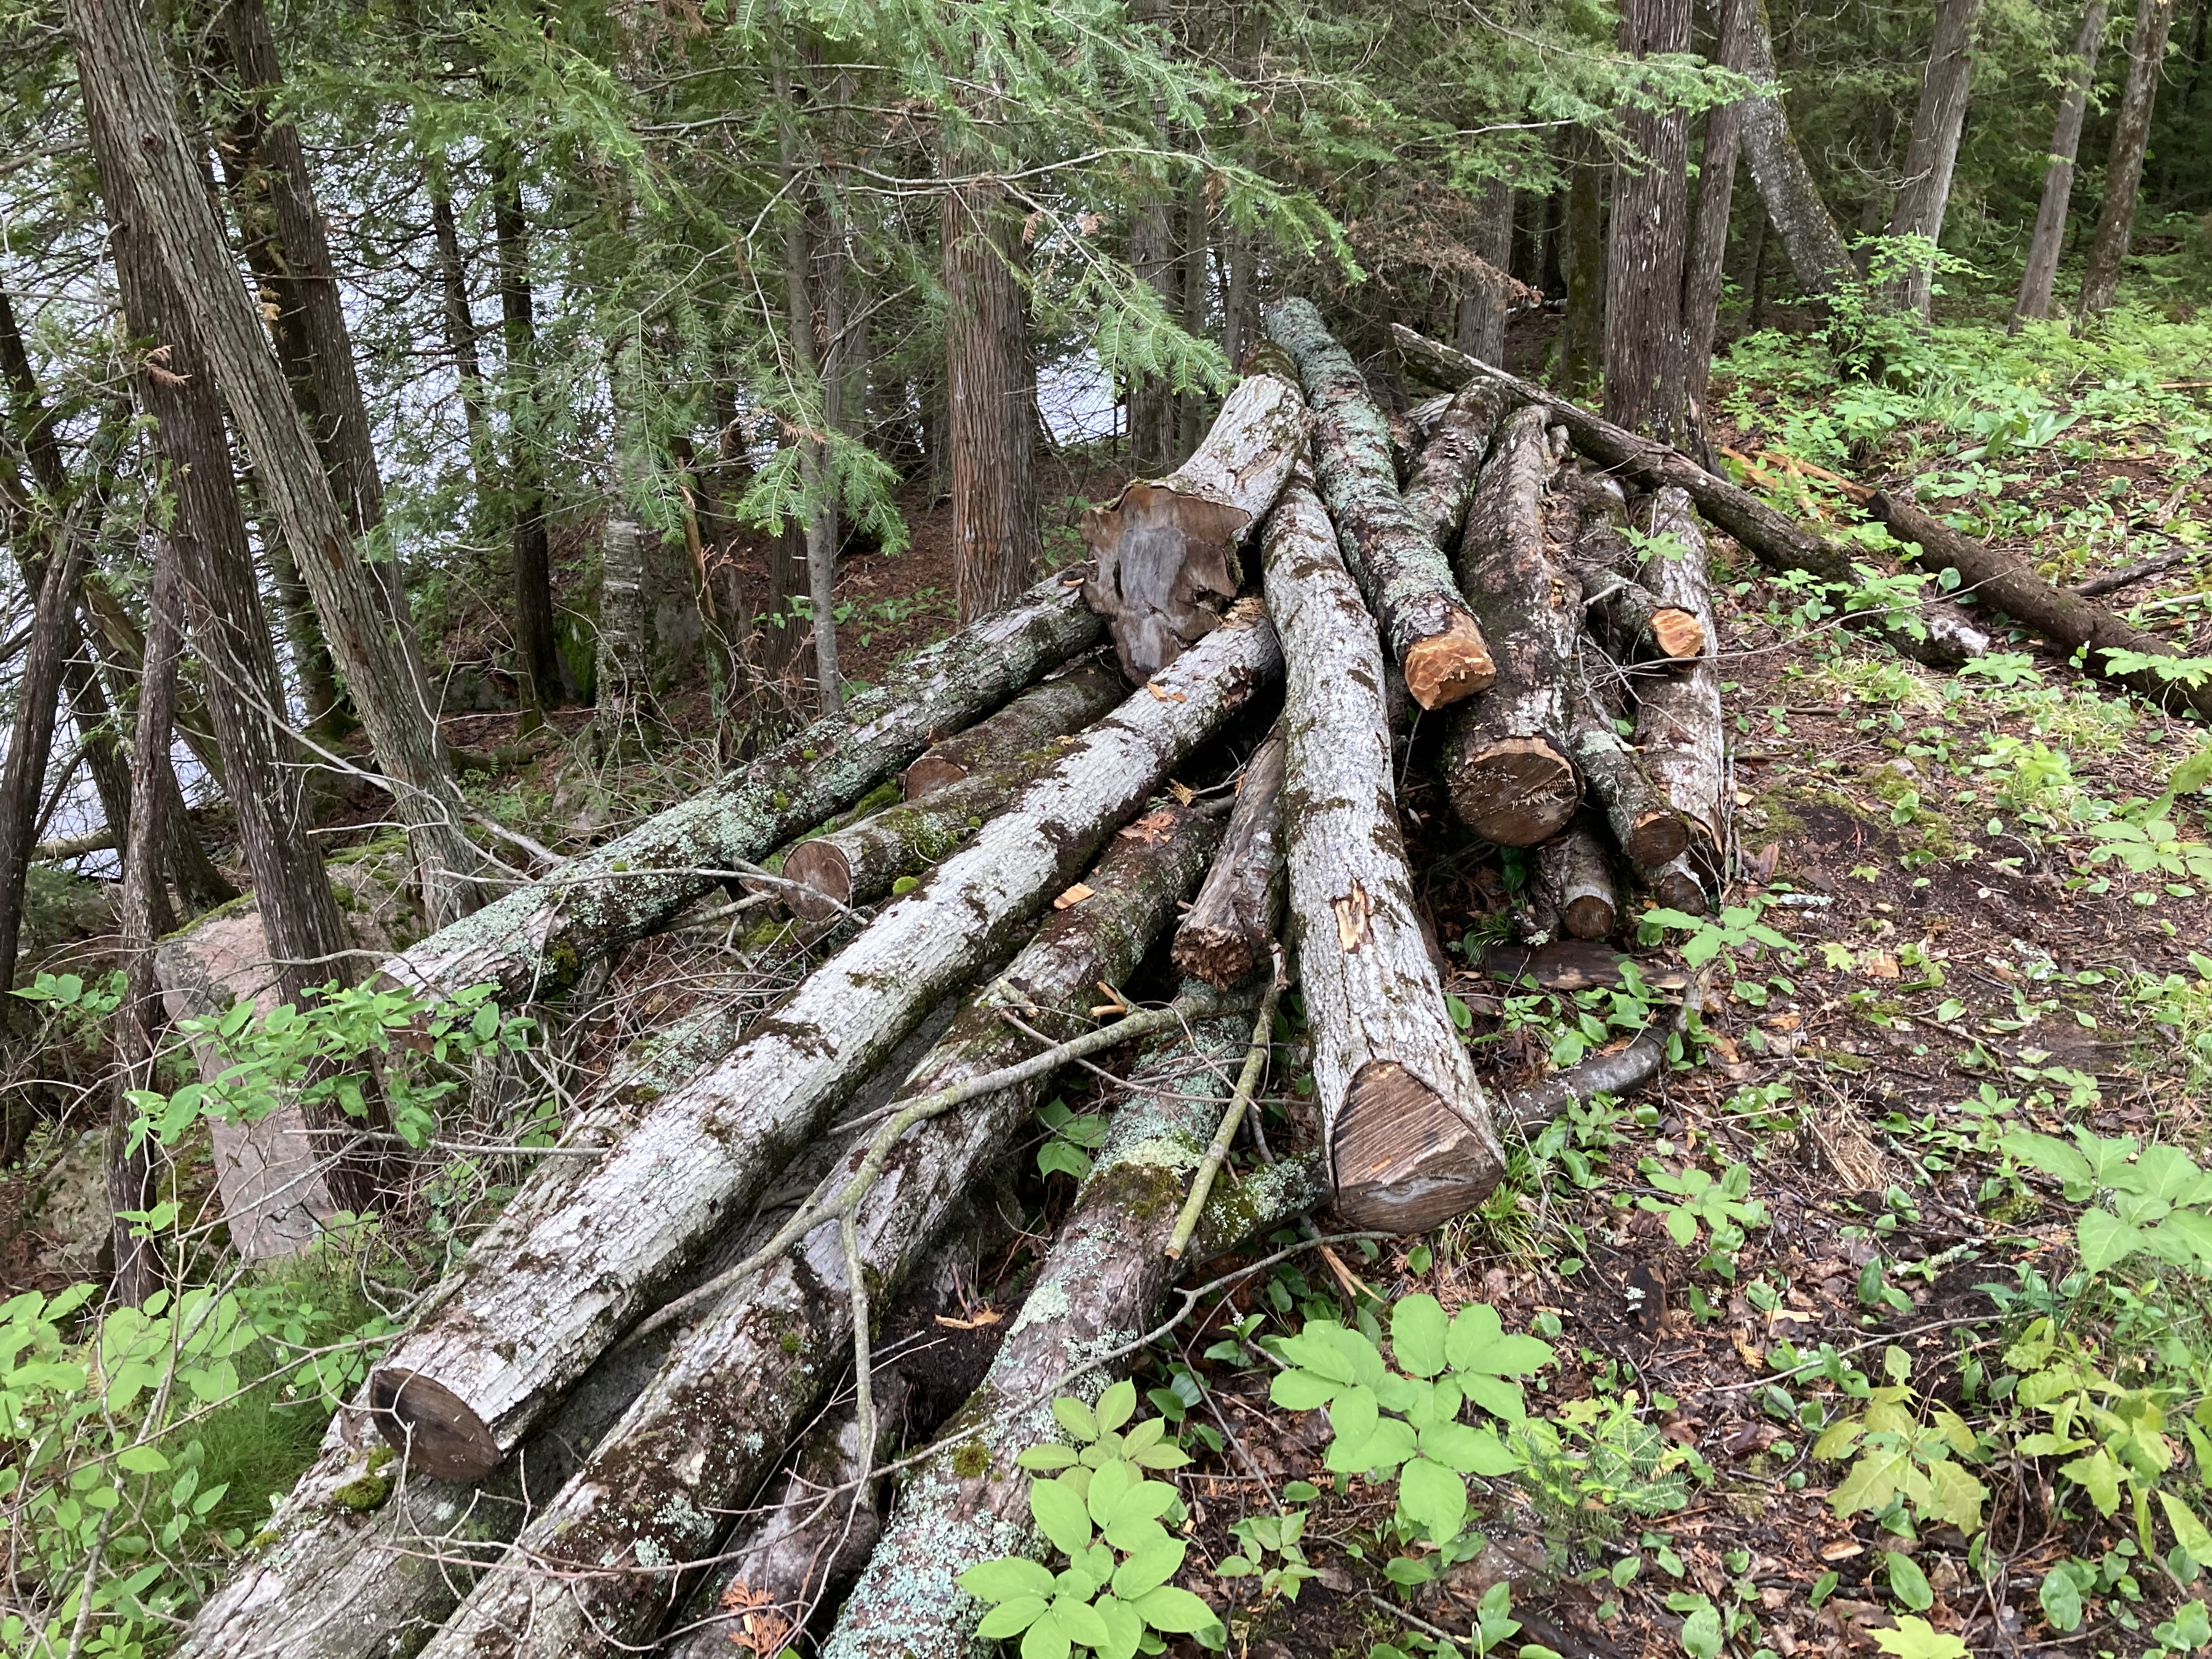 The second of two log piles left by the previous owner on the plateau. Logs are approximately six to ten inches in diameter, and are a mix of hardwoods.